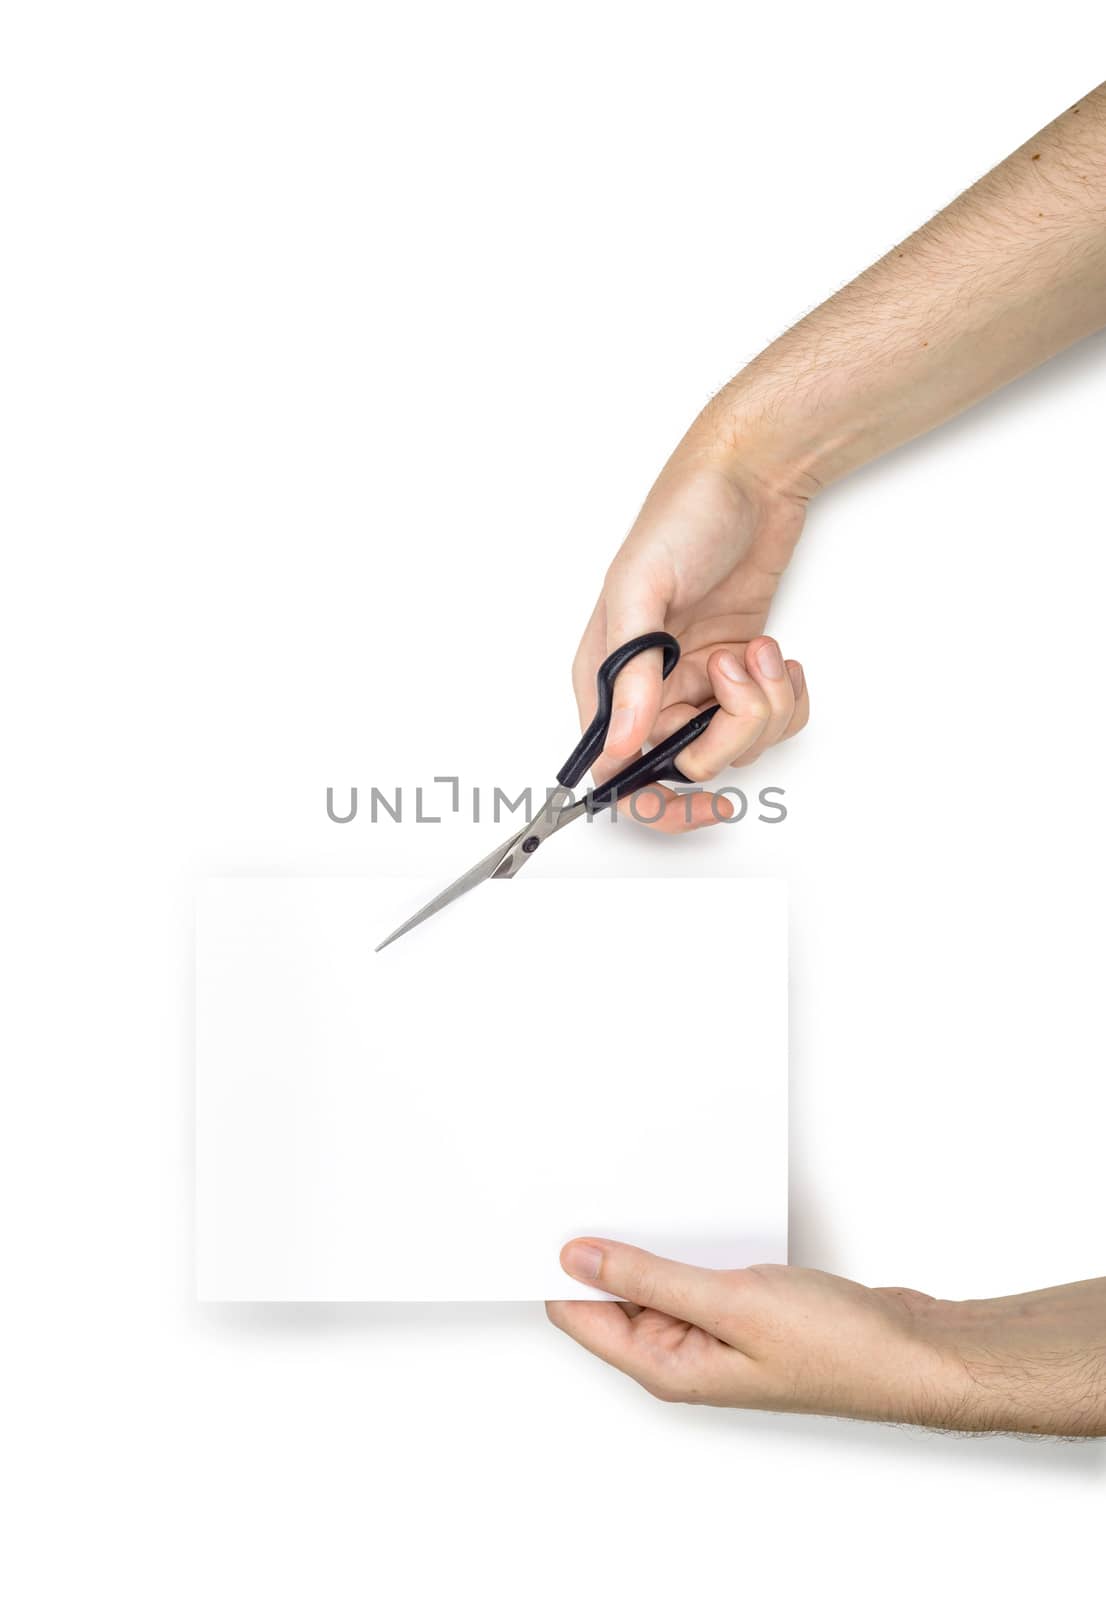 A woman is cutting a sheet of white paper using  metallic scissors, isolated on white background